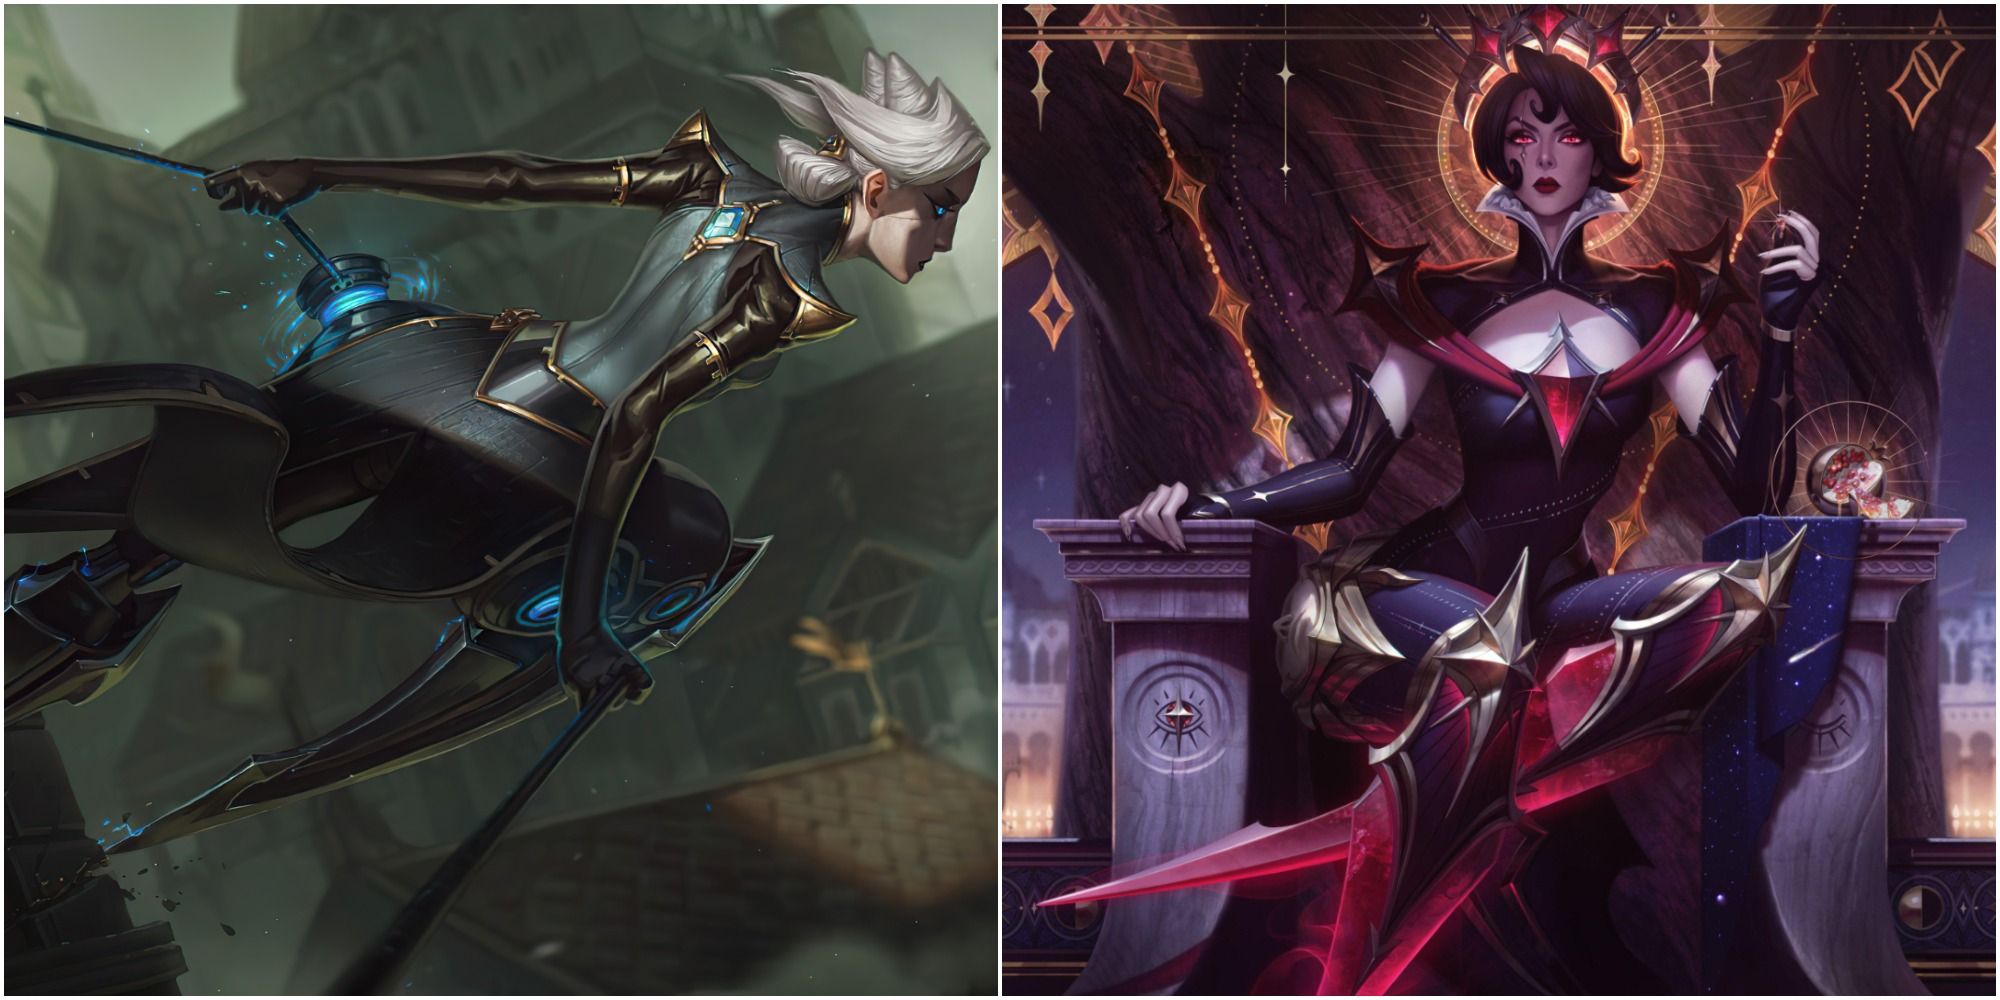 Camille The Steel Shadow overlooking Piltover from great heights and seated in a chair in her Arcana skin looking wise